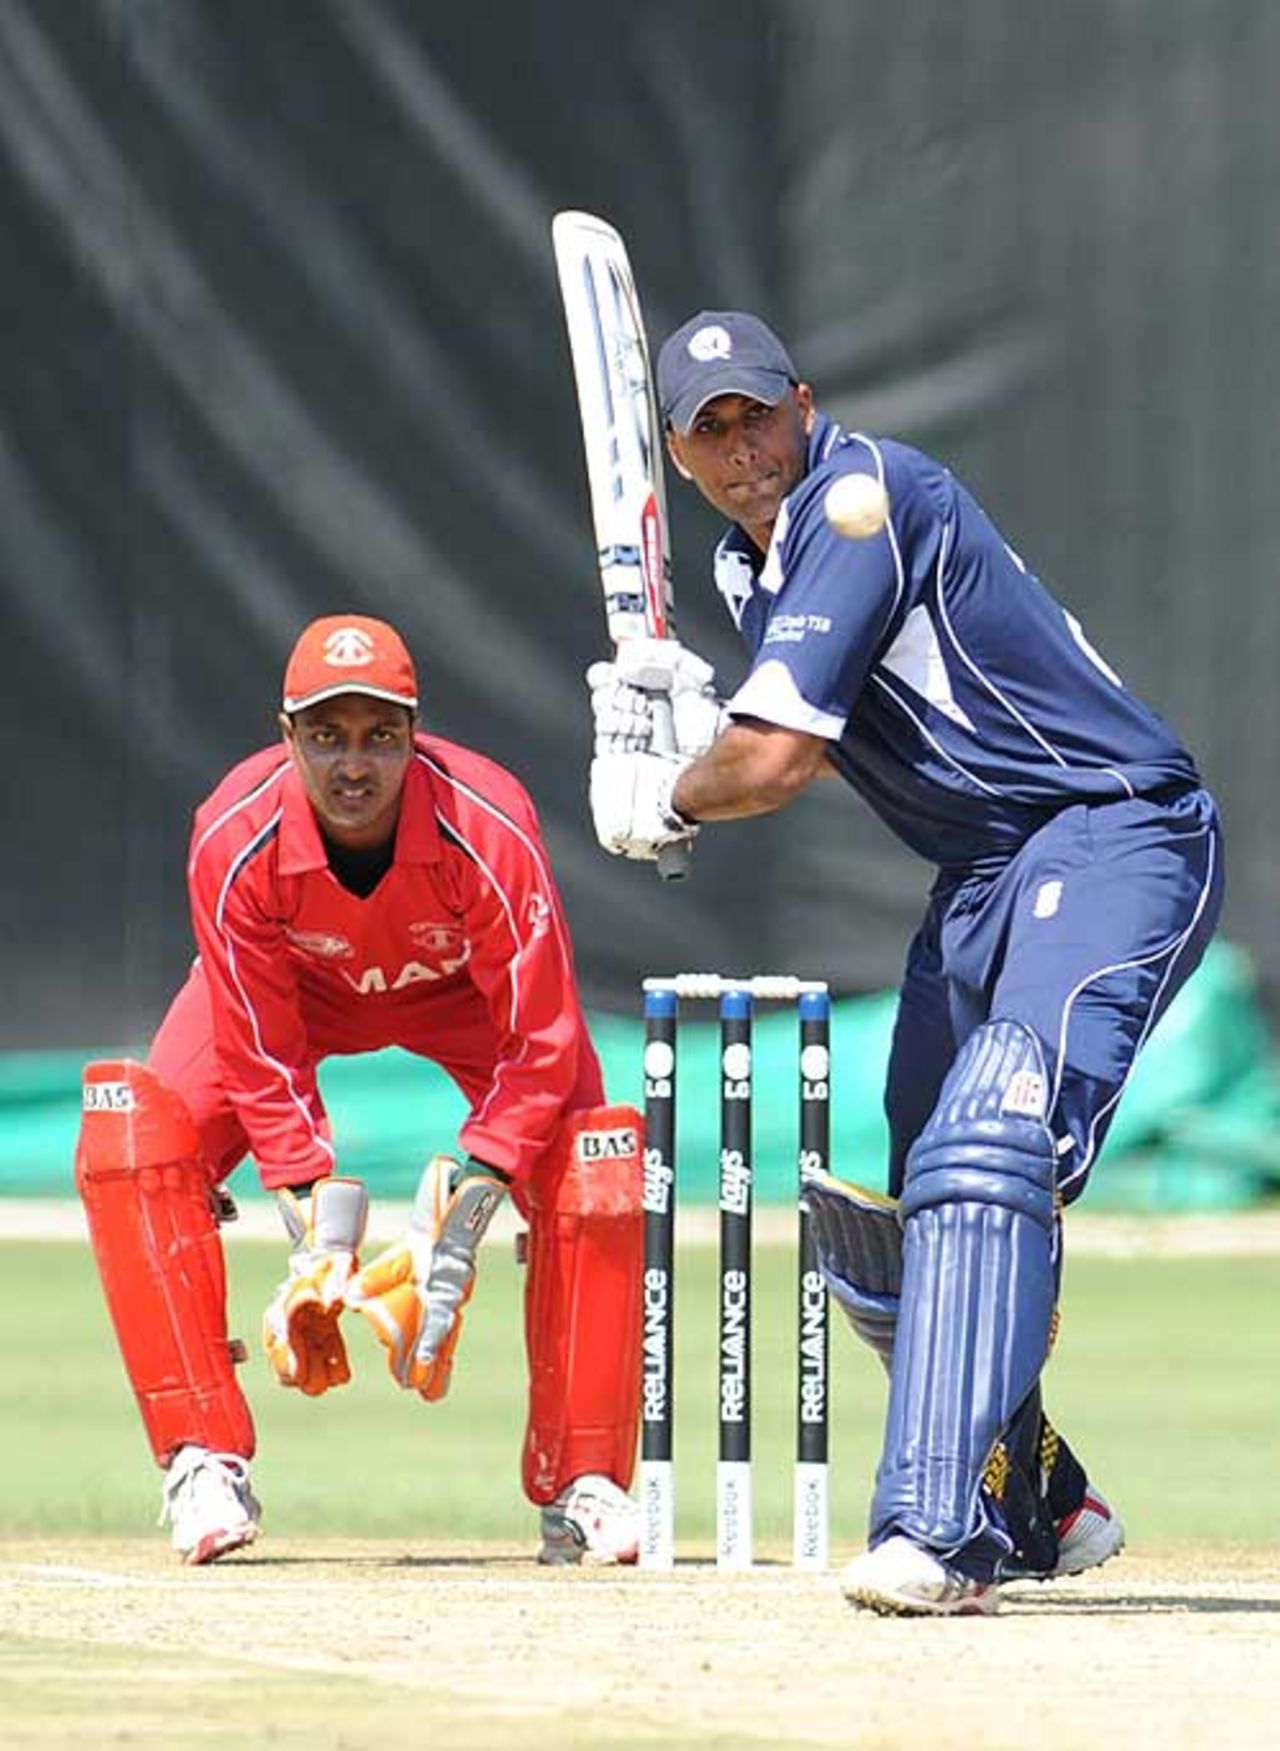 Scotland's Navdeep Poonia on his way to 79, Oman v Scotland, ICC World Cup Qualifiers, Johannesburg, April 4, 2009